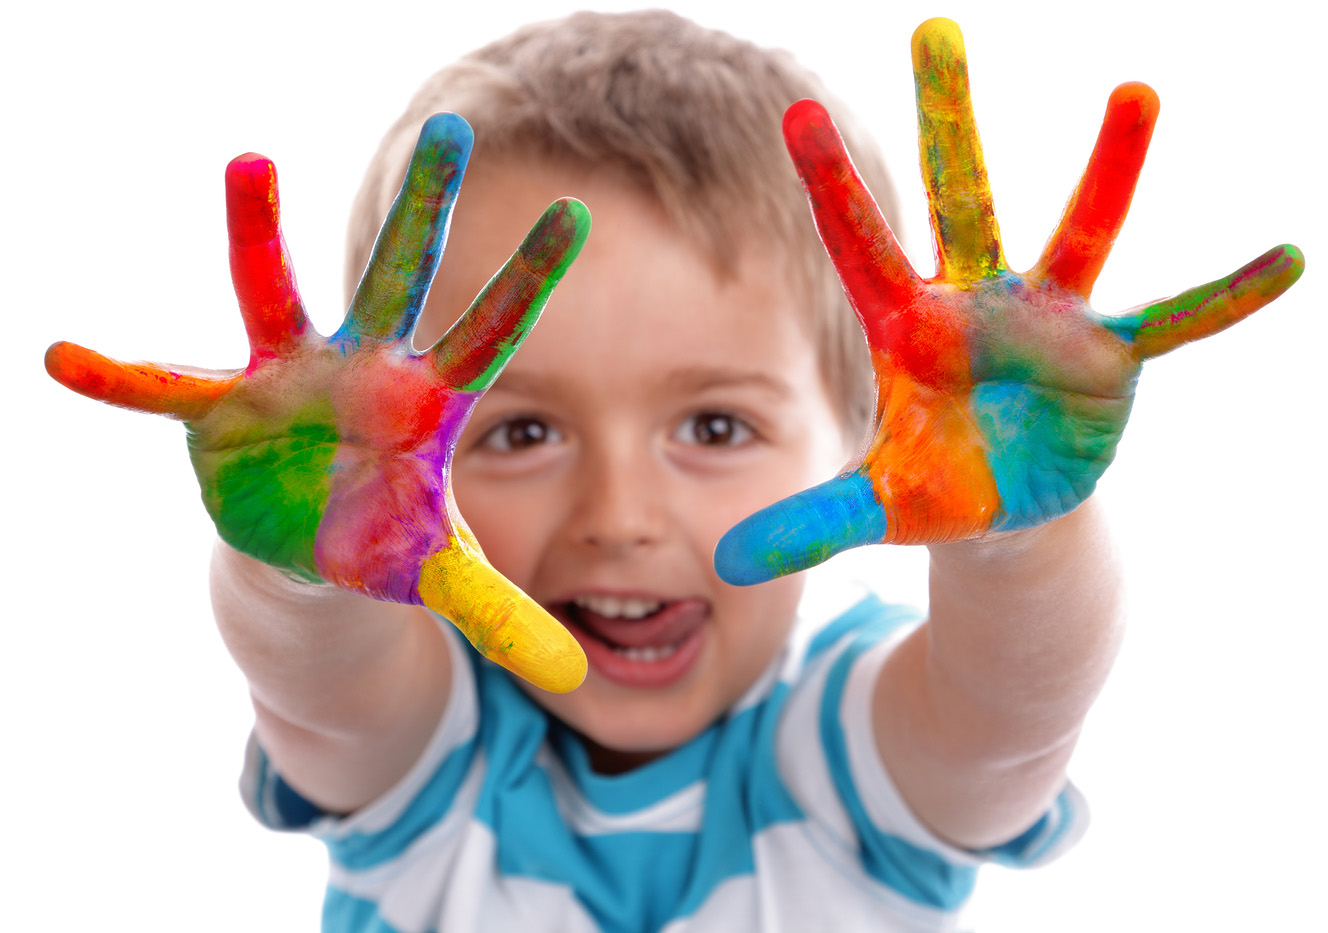 Boy with hands painted in colorful paints ready to make hand pri